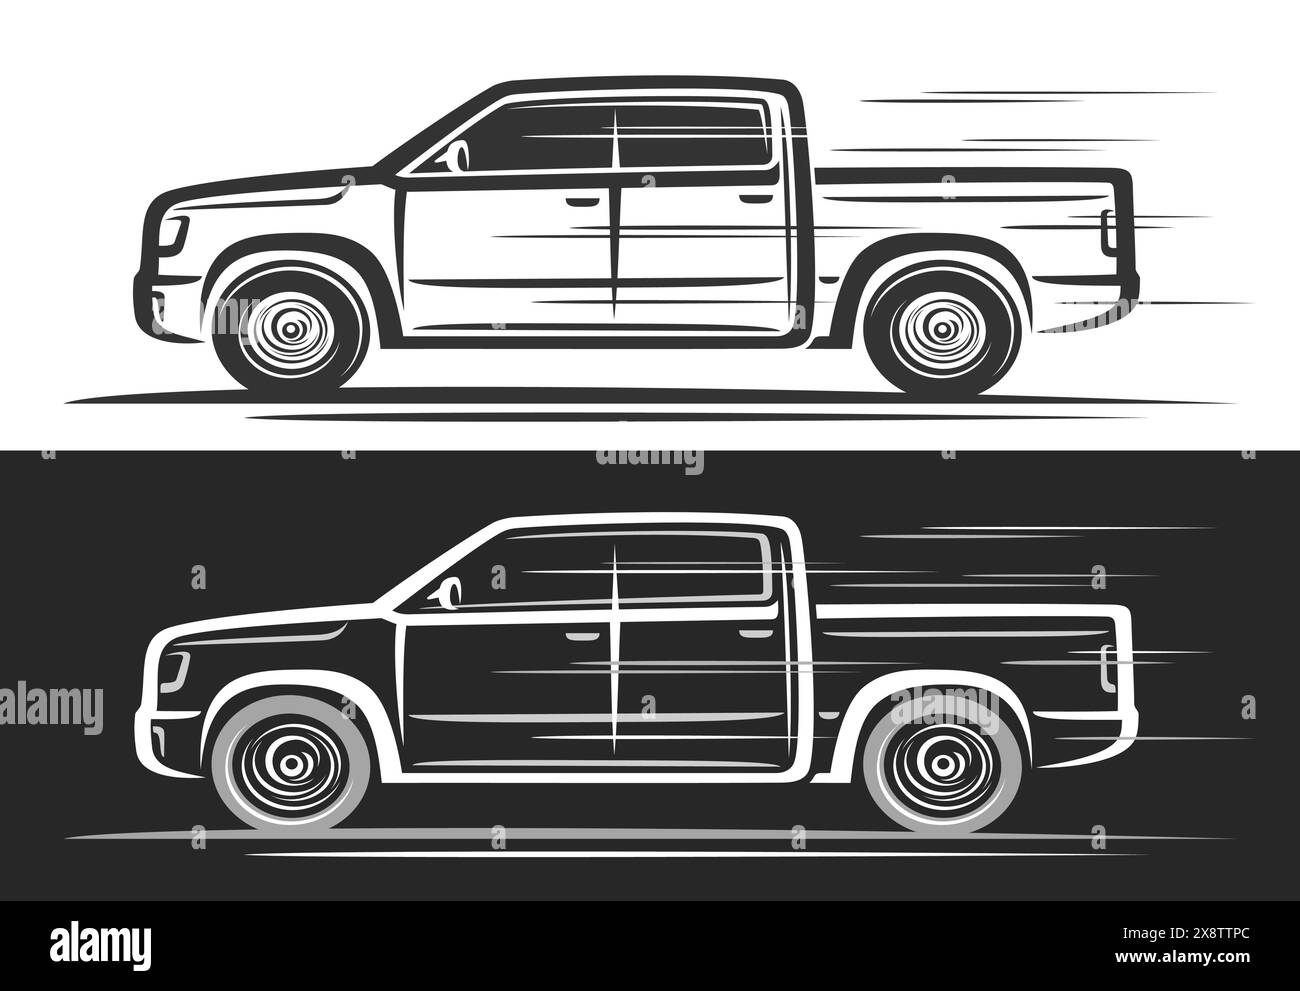 Vector logo for Pickup Truck, automotive decorative banner with simple contour illustration of line art monochrome modern pickup truck in moving, runn Stock Vector